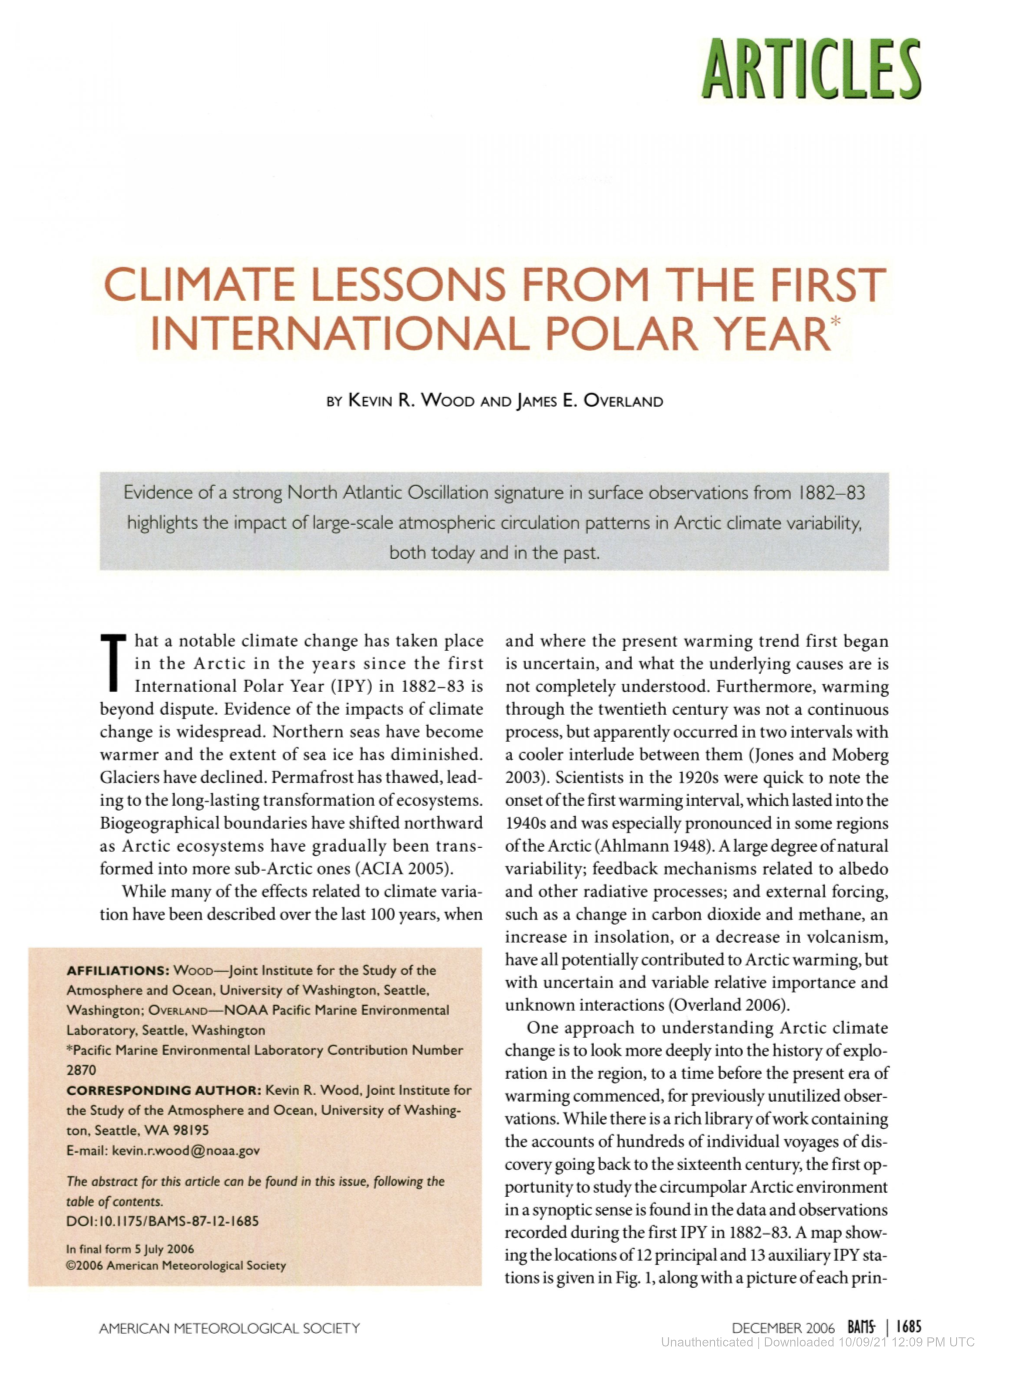 Climate Lessons from the First International Polar Year*